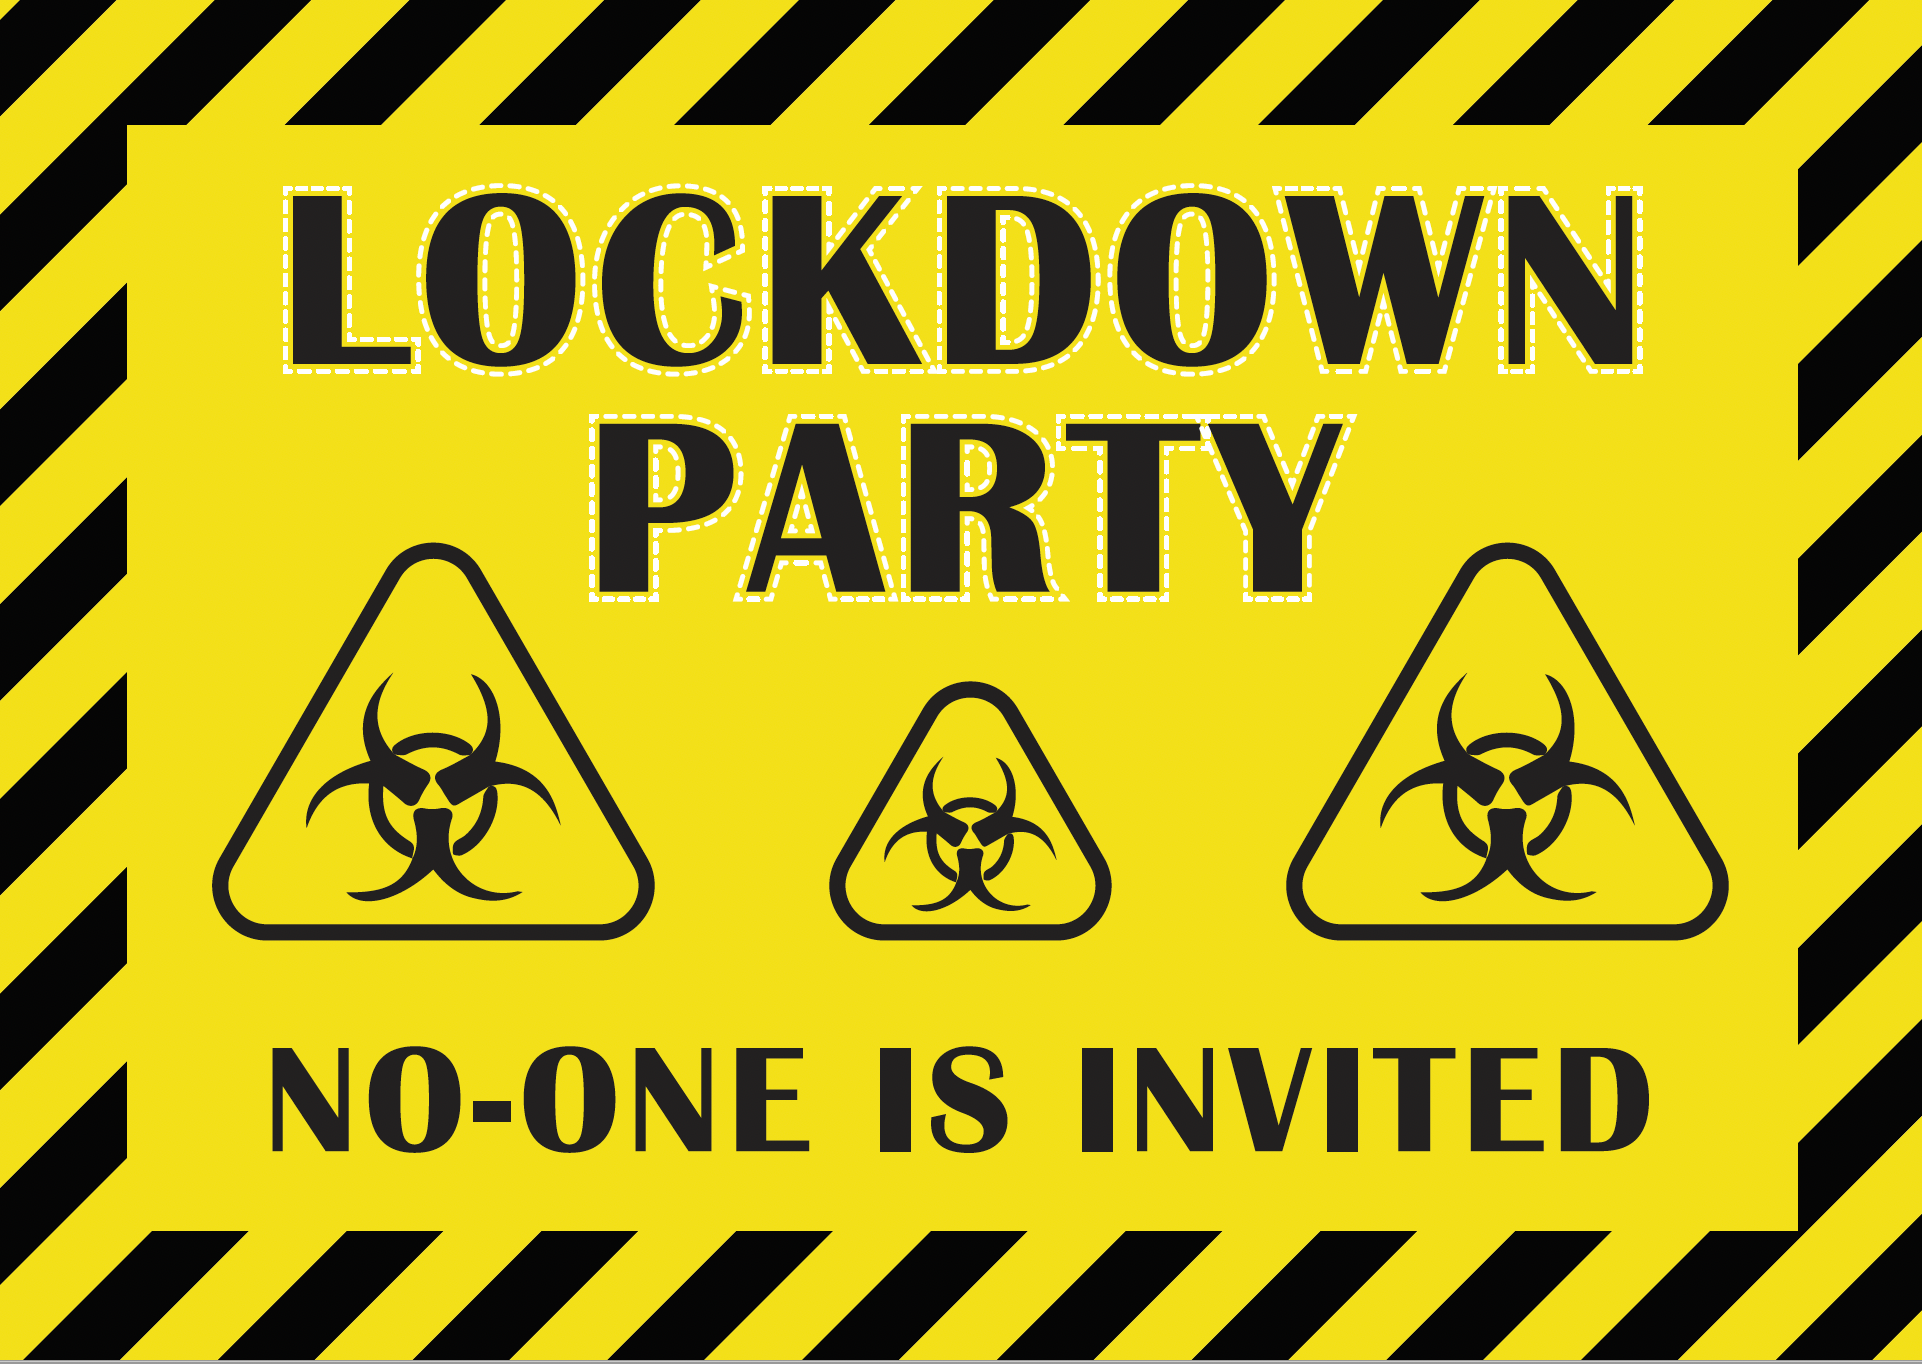 LOCKDOWN party no-one is invited